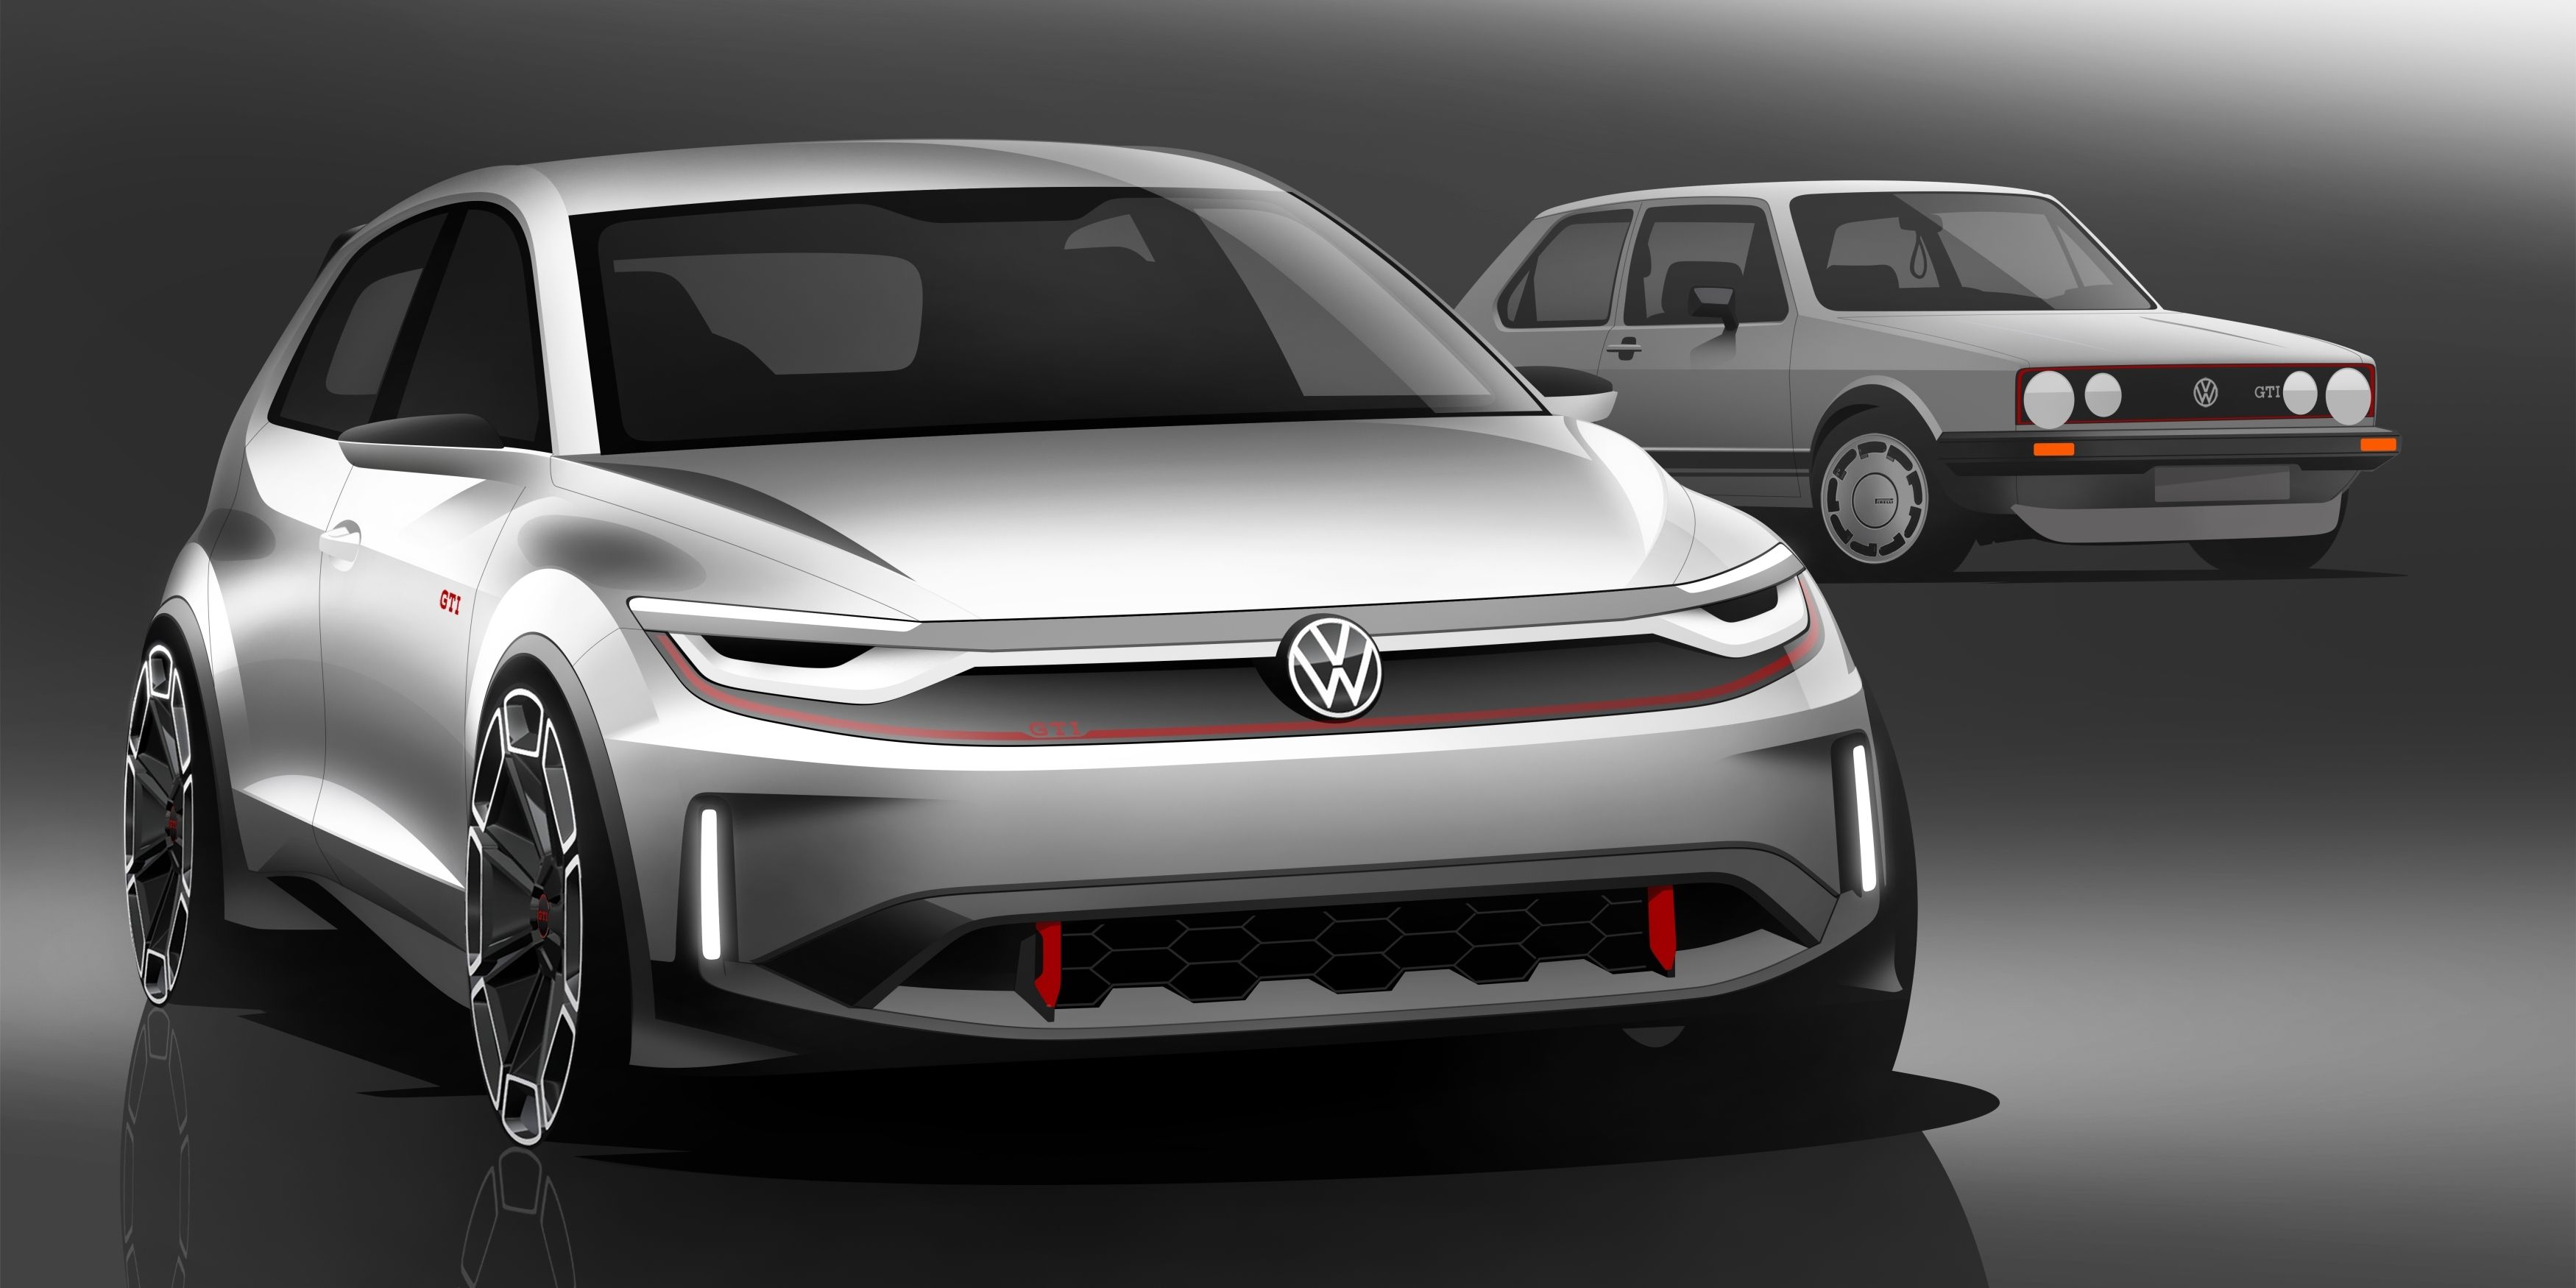 Updated VW logo makes its debut on ID 3 electric car at Frankfurt